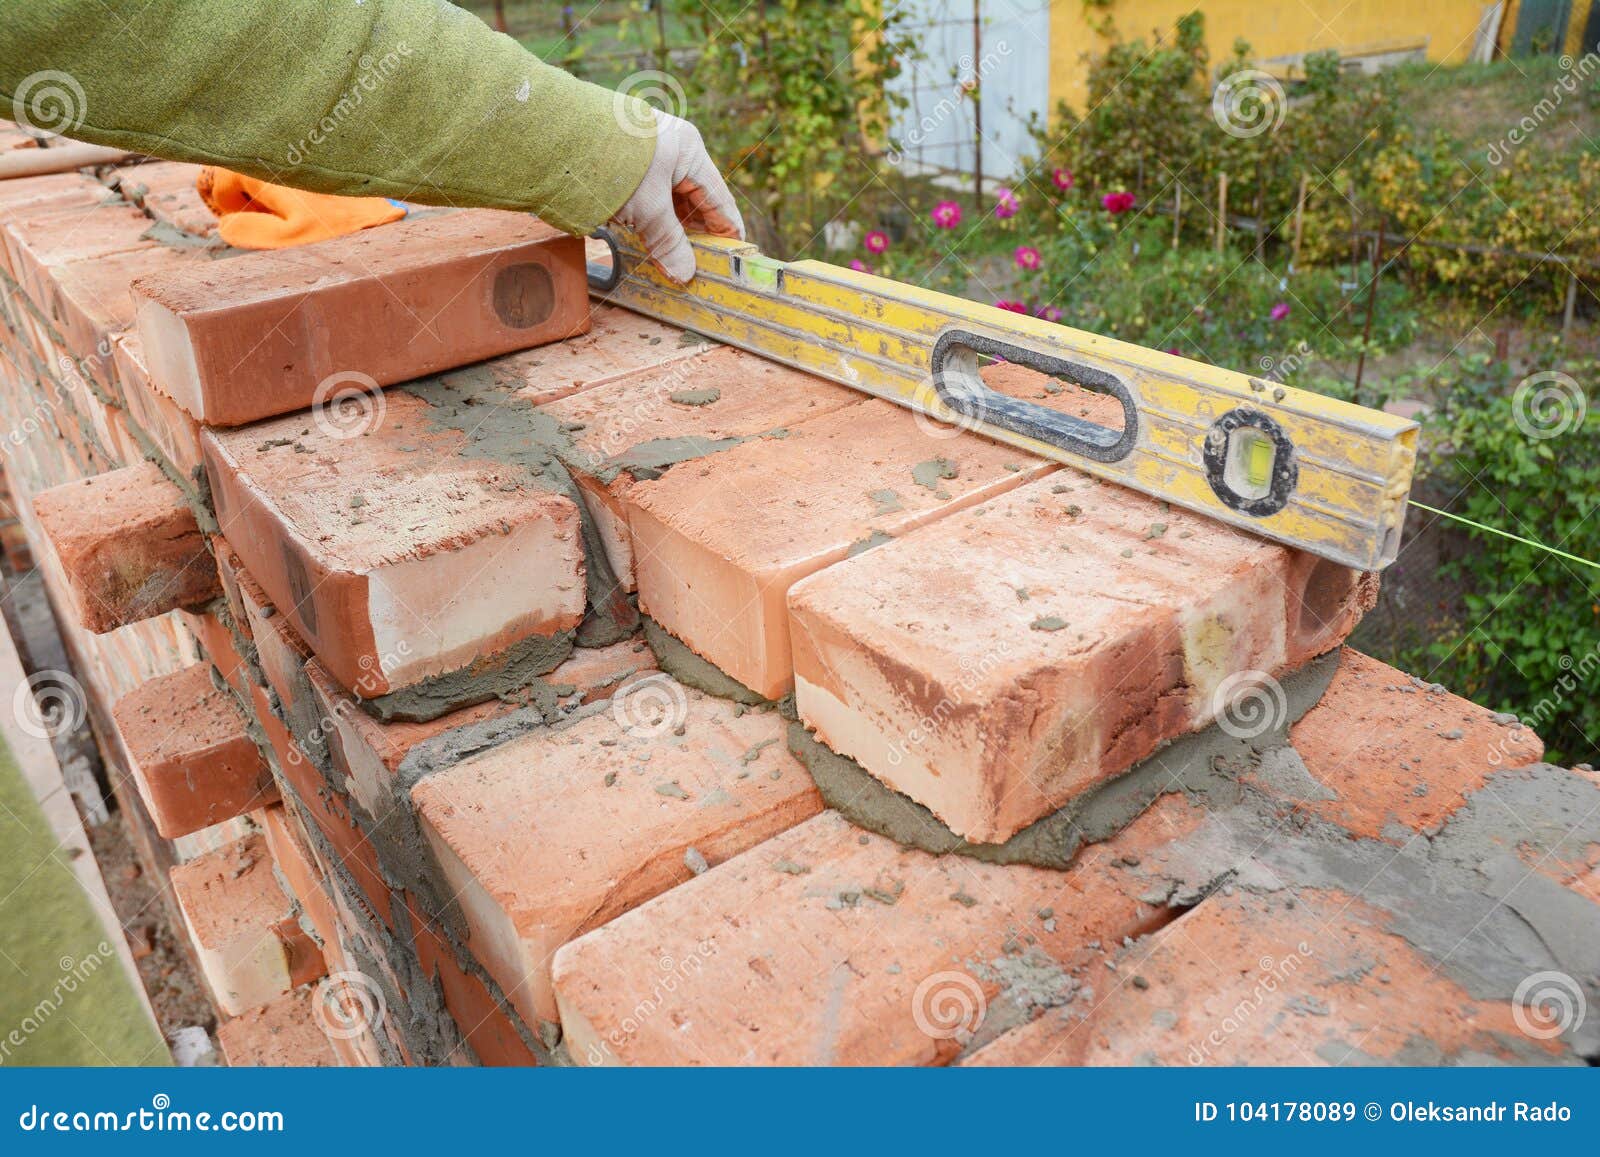 bricklaying, brickwork. close up bricklaying on house cnstruction site. bricklayer using a spirit level to check brick wall o